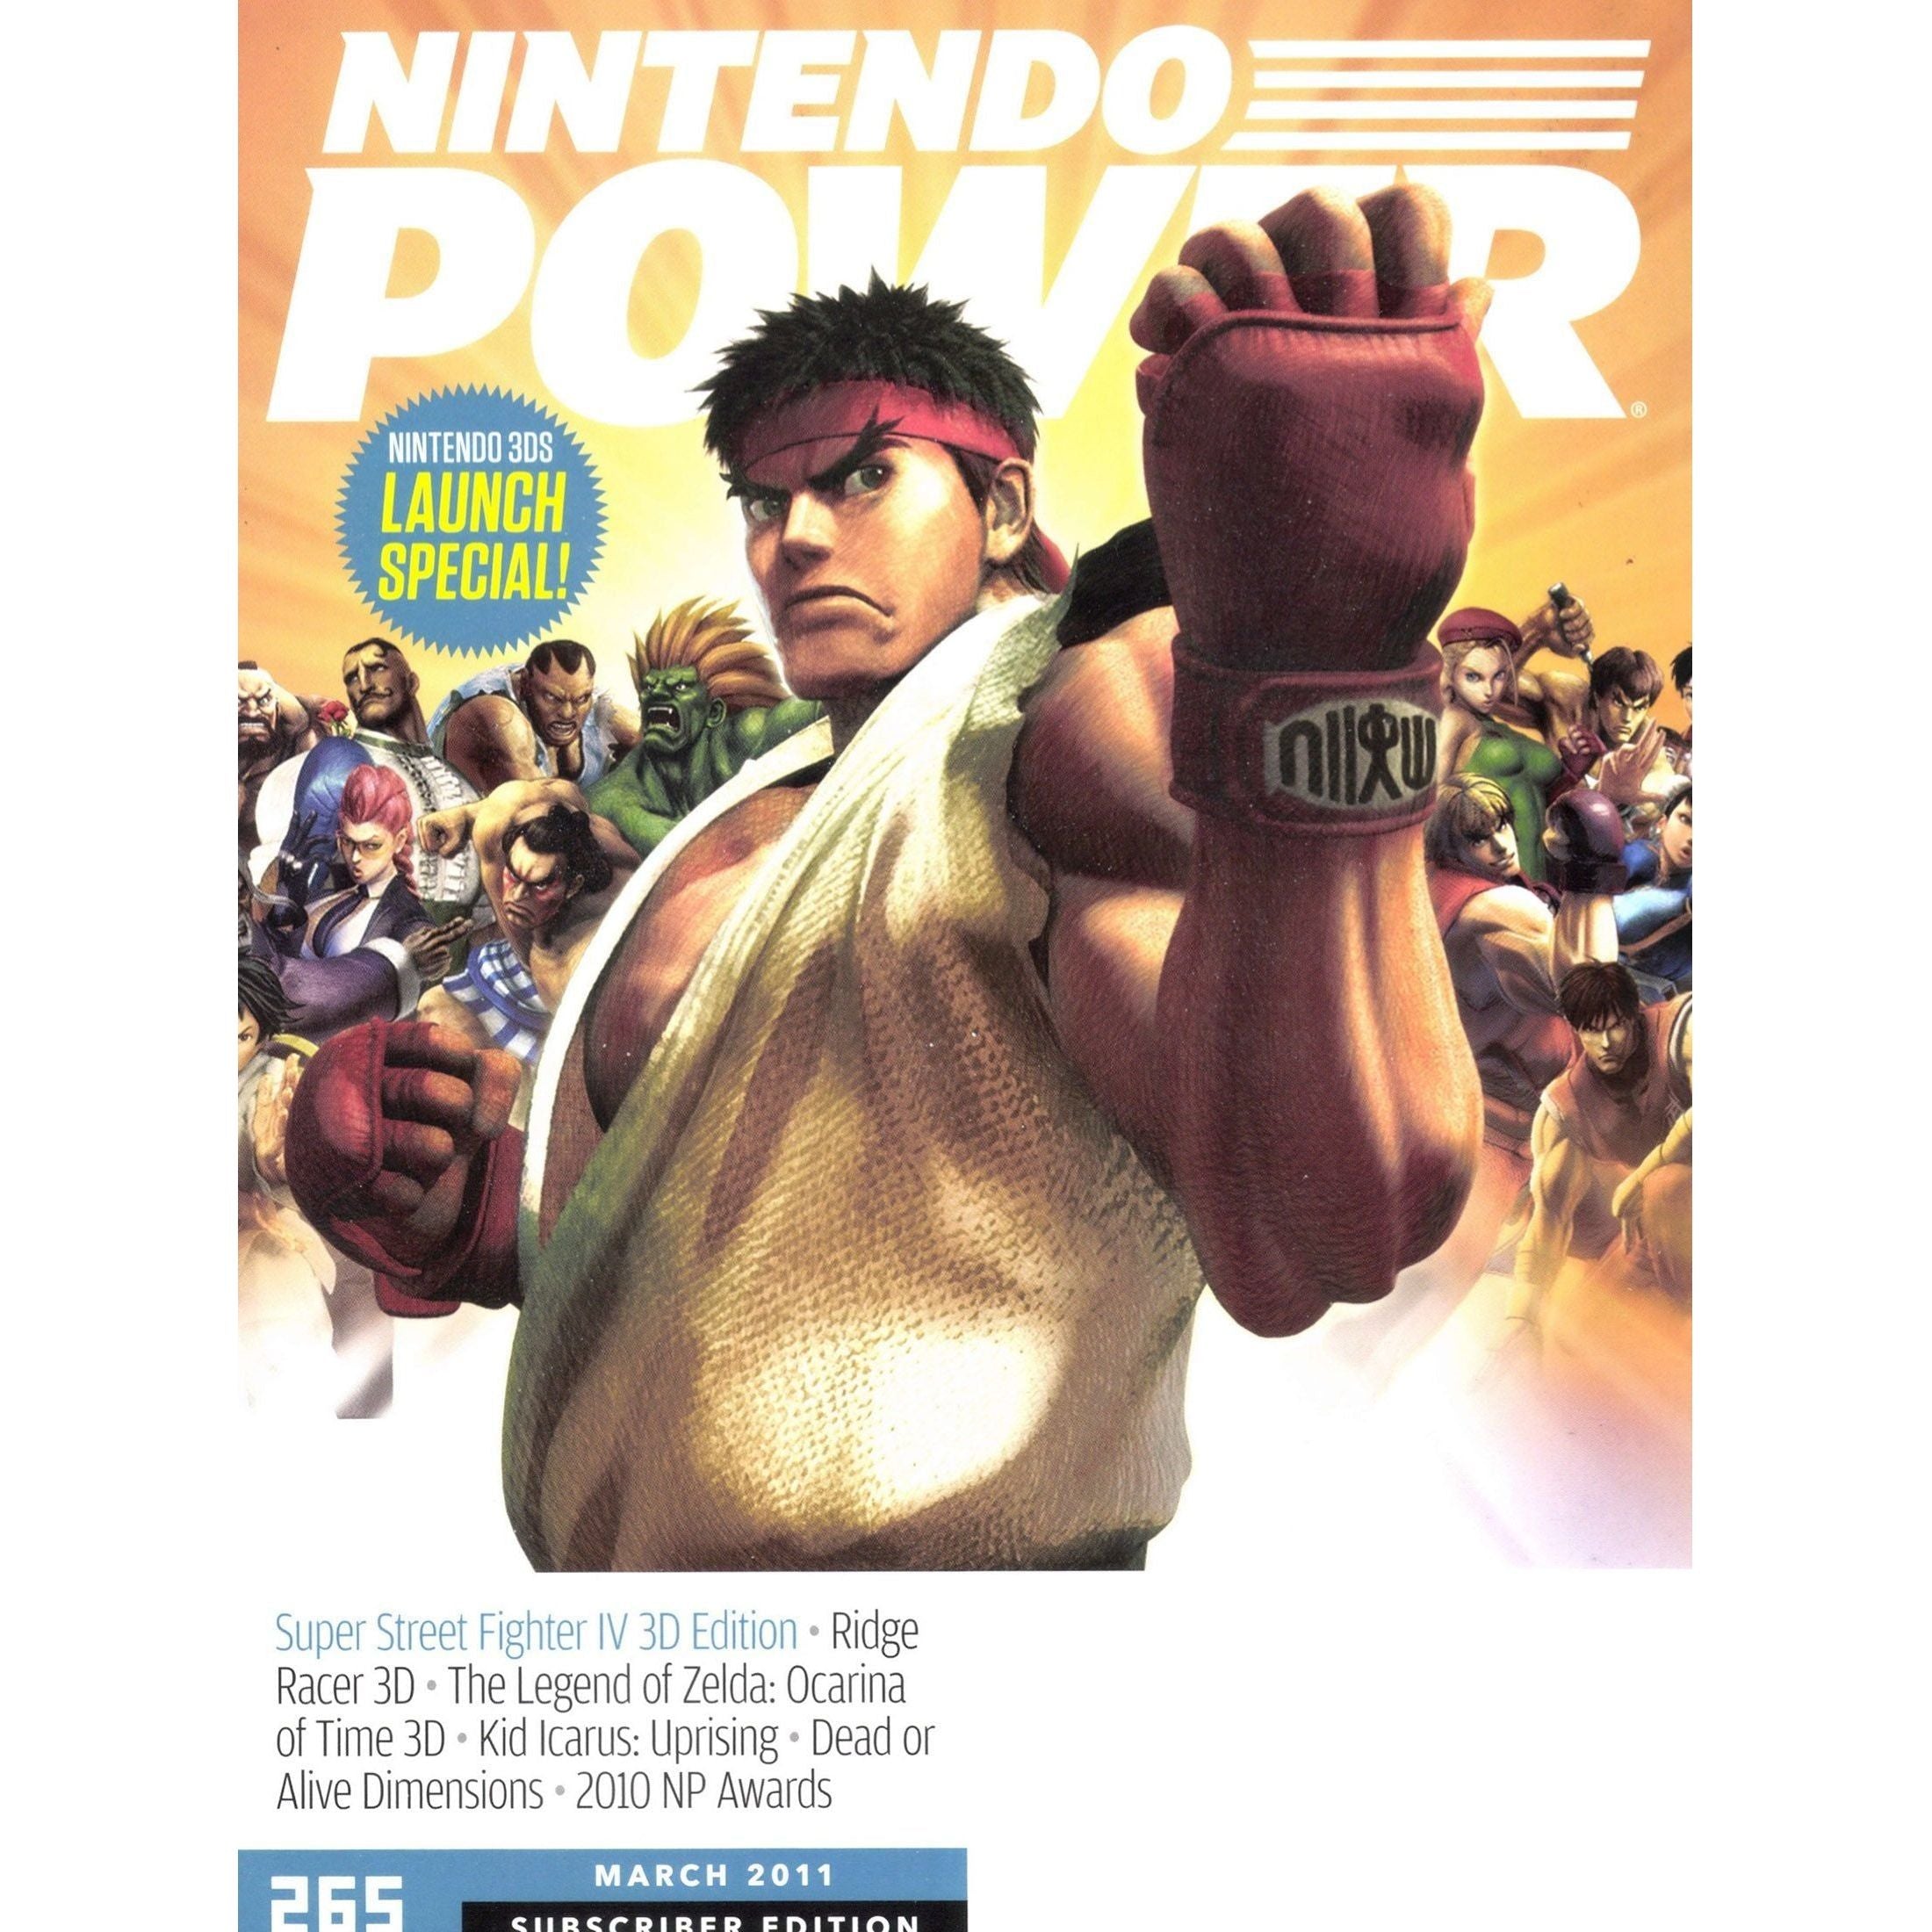 Nintendo Power Magazine (#265 Subscriber Edition) - Complete and/or Good Condition